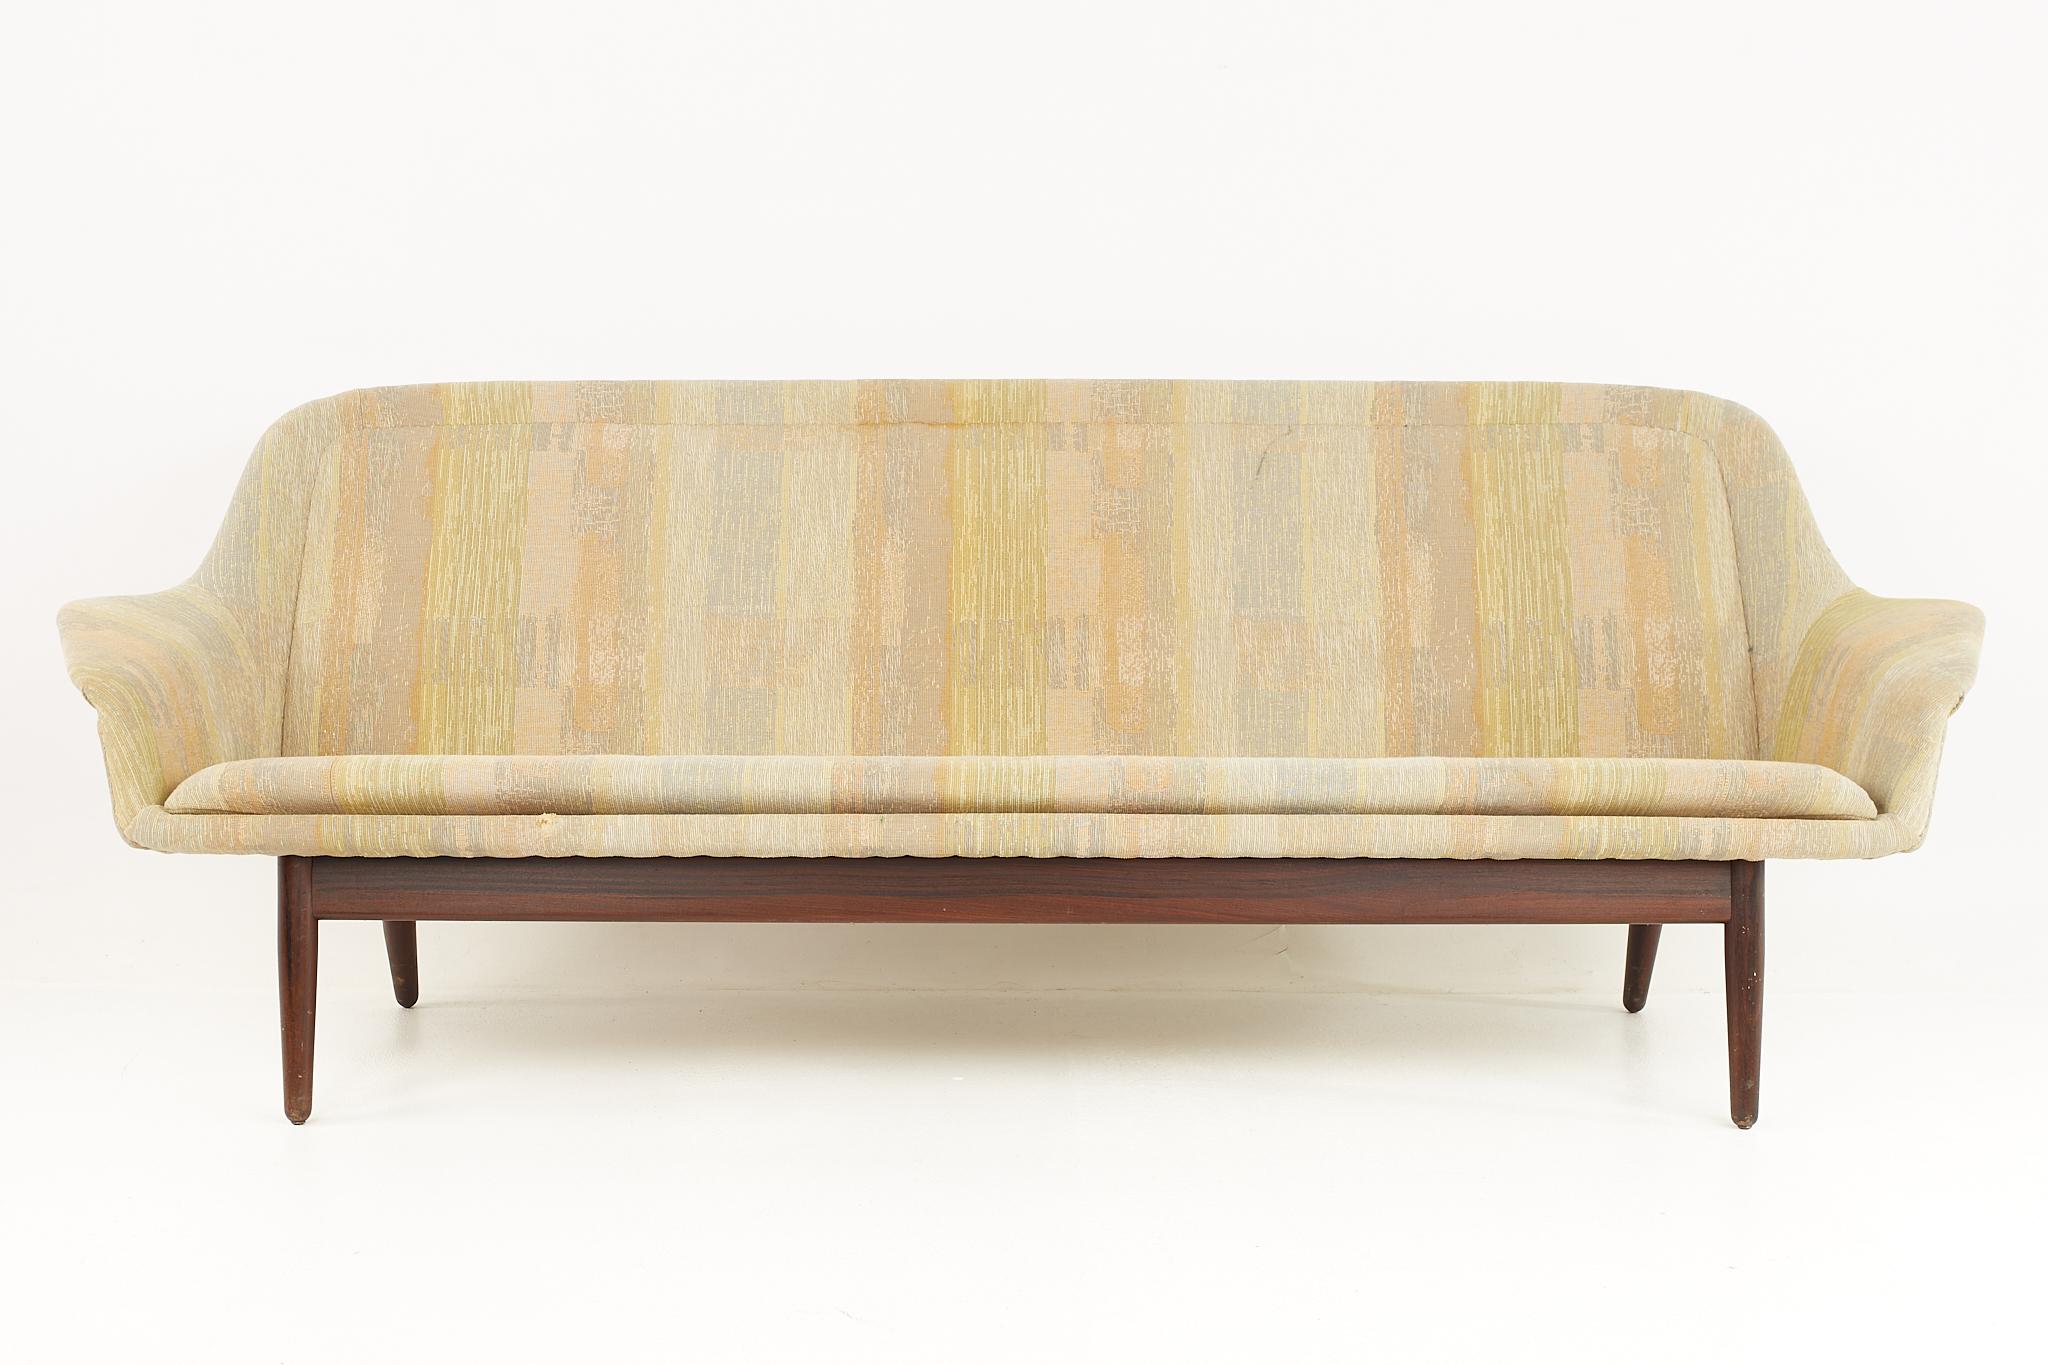 Arne Vodder for George Tanier mid century Danish walnut loveseat

This loveseat measures: 89.5 wide x 27 deep x 31 inches high, with a seat height of 16 and arm height of 21.5 inches

All pieces of furniture can be had in what we call restored